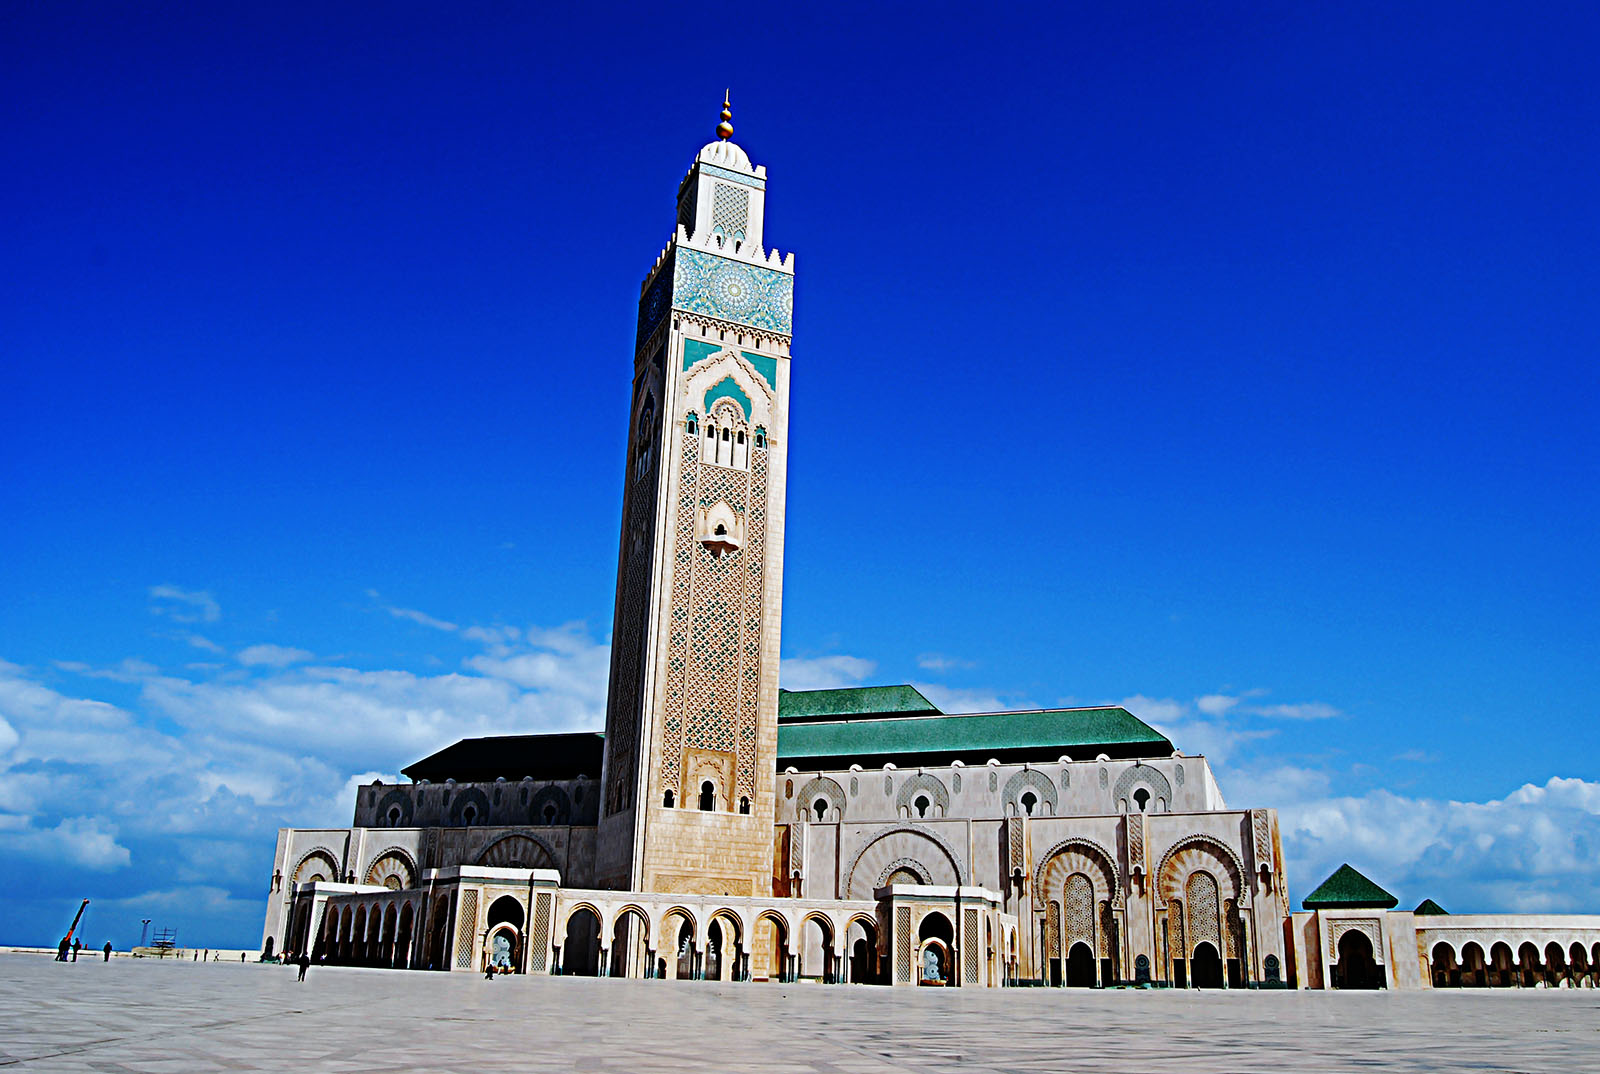 Images of Hassan II Mosque | 1600x1074